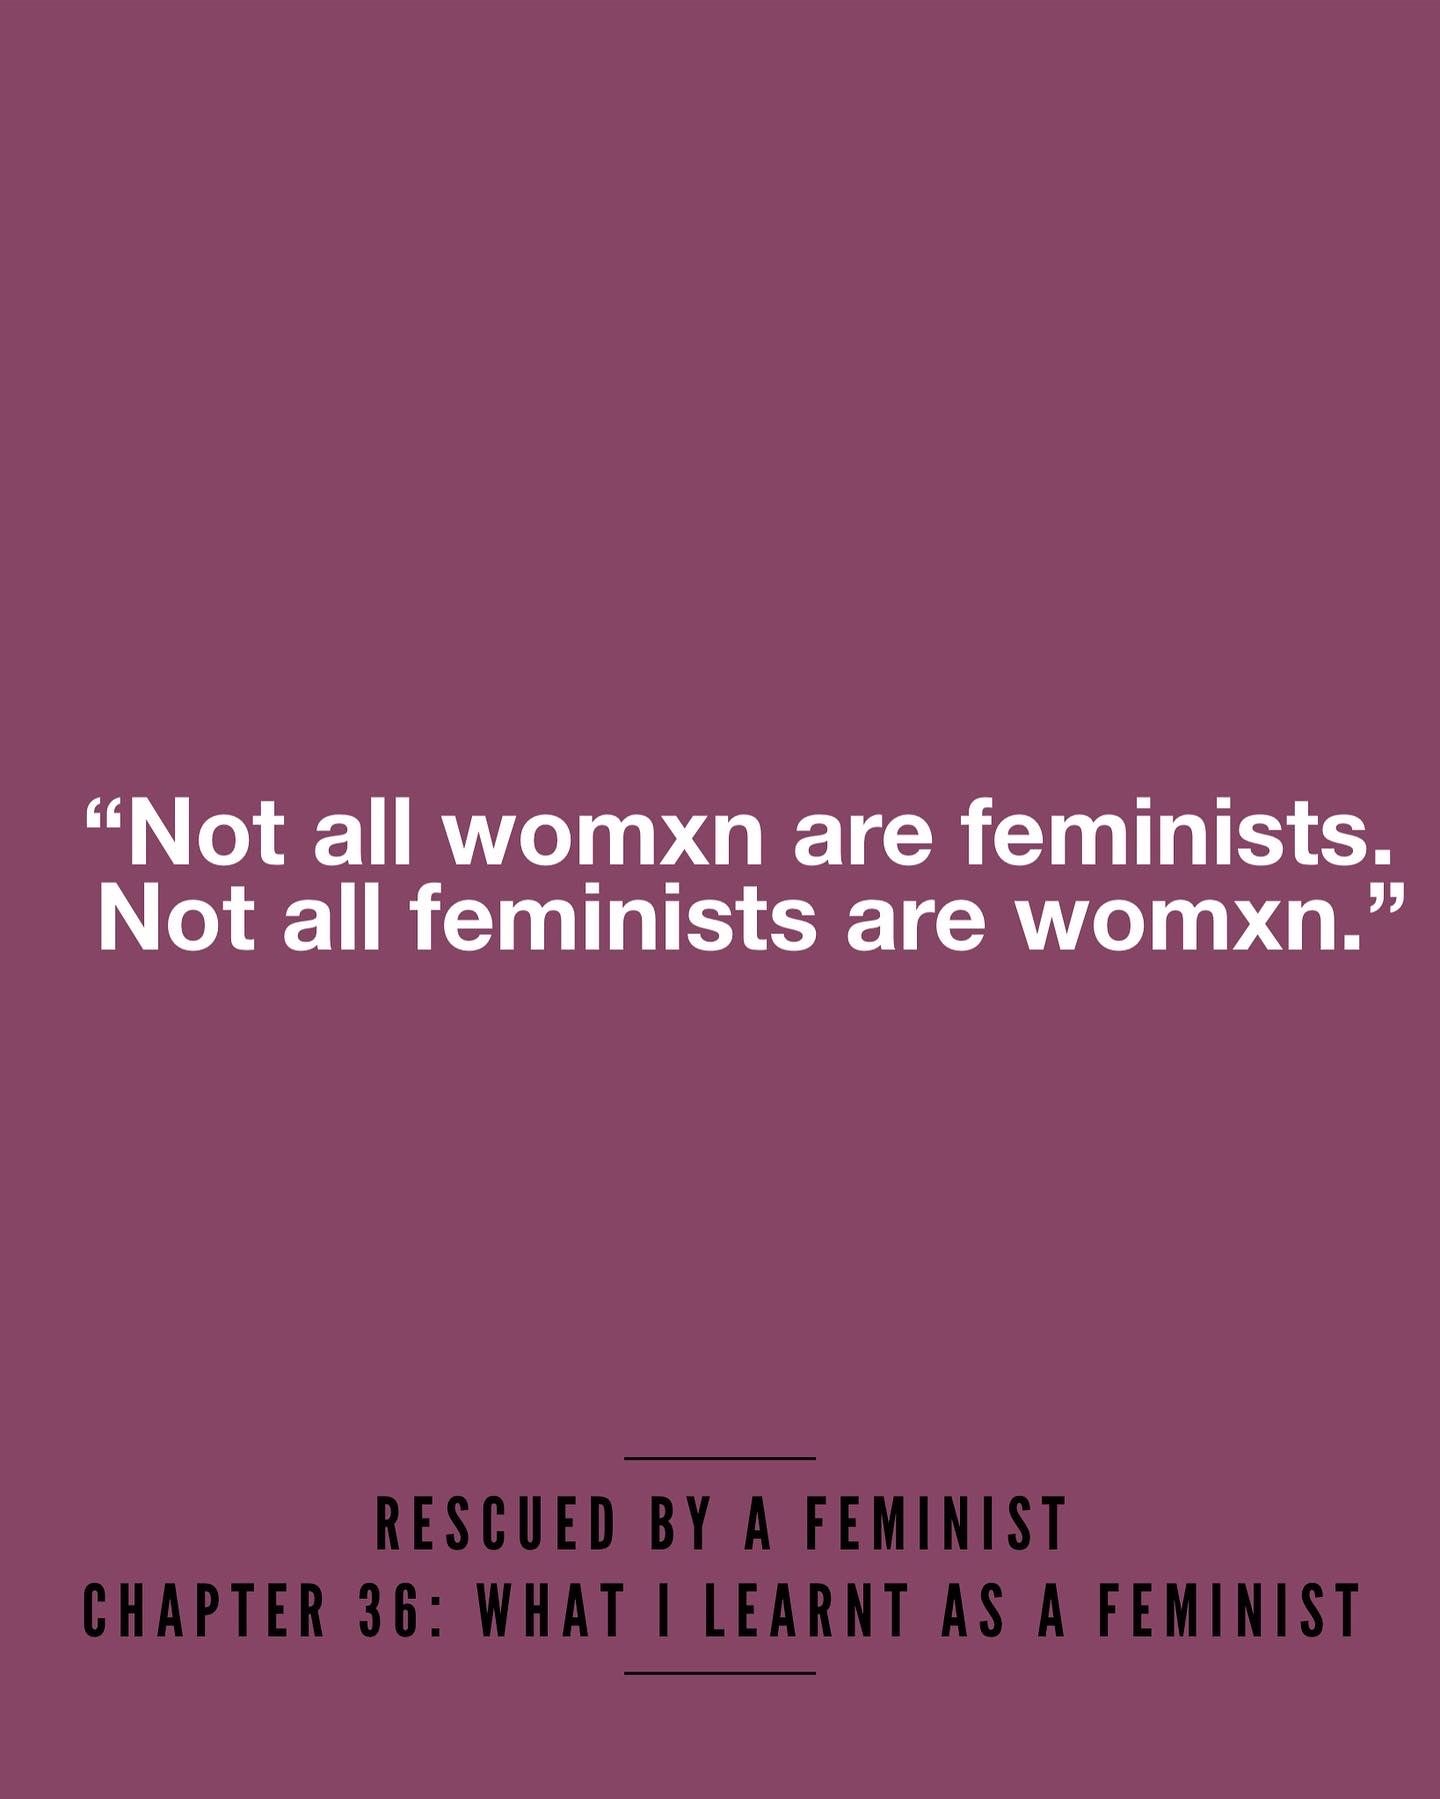 WHAT I LEARNT AS A FEMINIST: CHAPTER 36